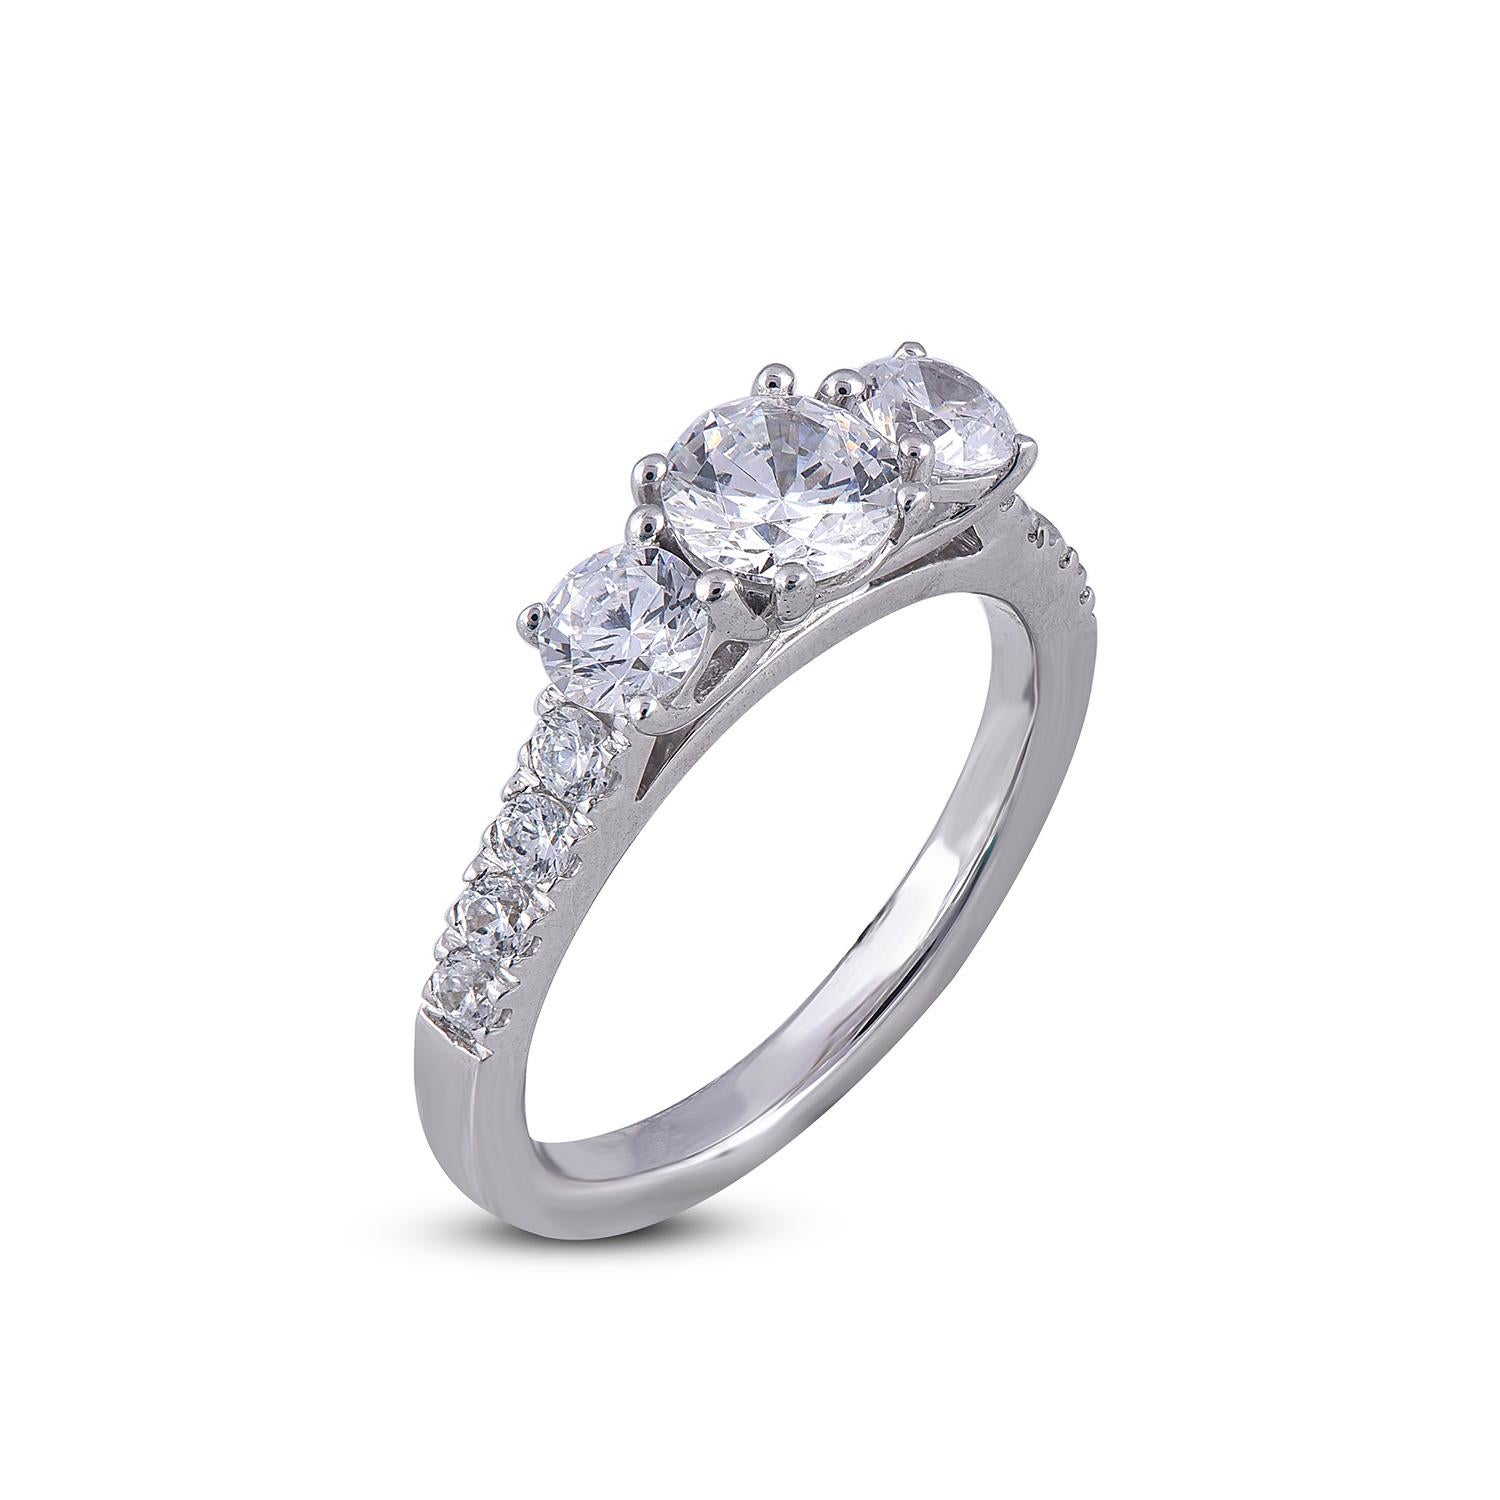 This 3 stone ring shines bright with 3 center stone and handcrafted in 18 karat White gold. it features 11 diamonds 0.75ct of centre stone and each side diamond is 0.30 ct and remaining diamond on shank lined secured in prong setting. Diamonds are